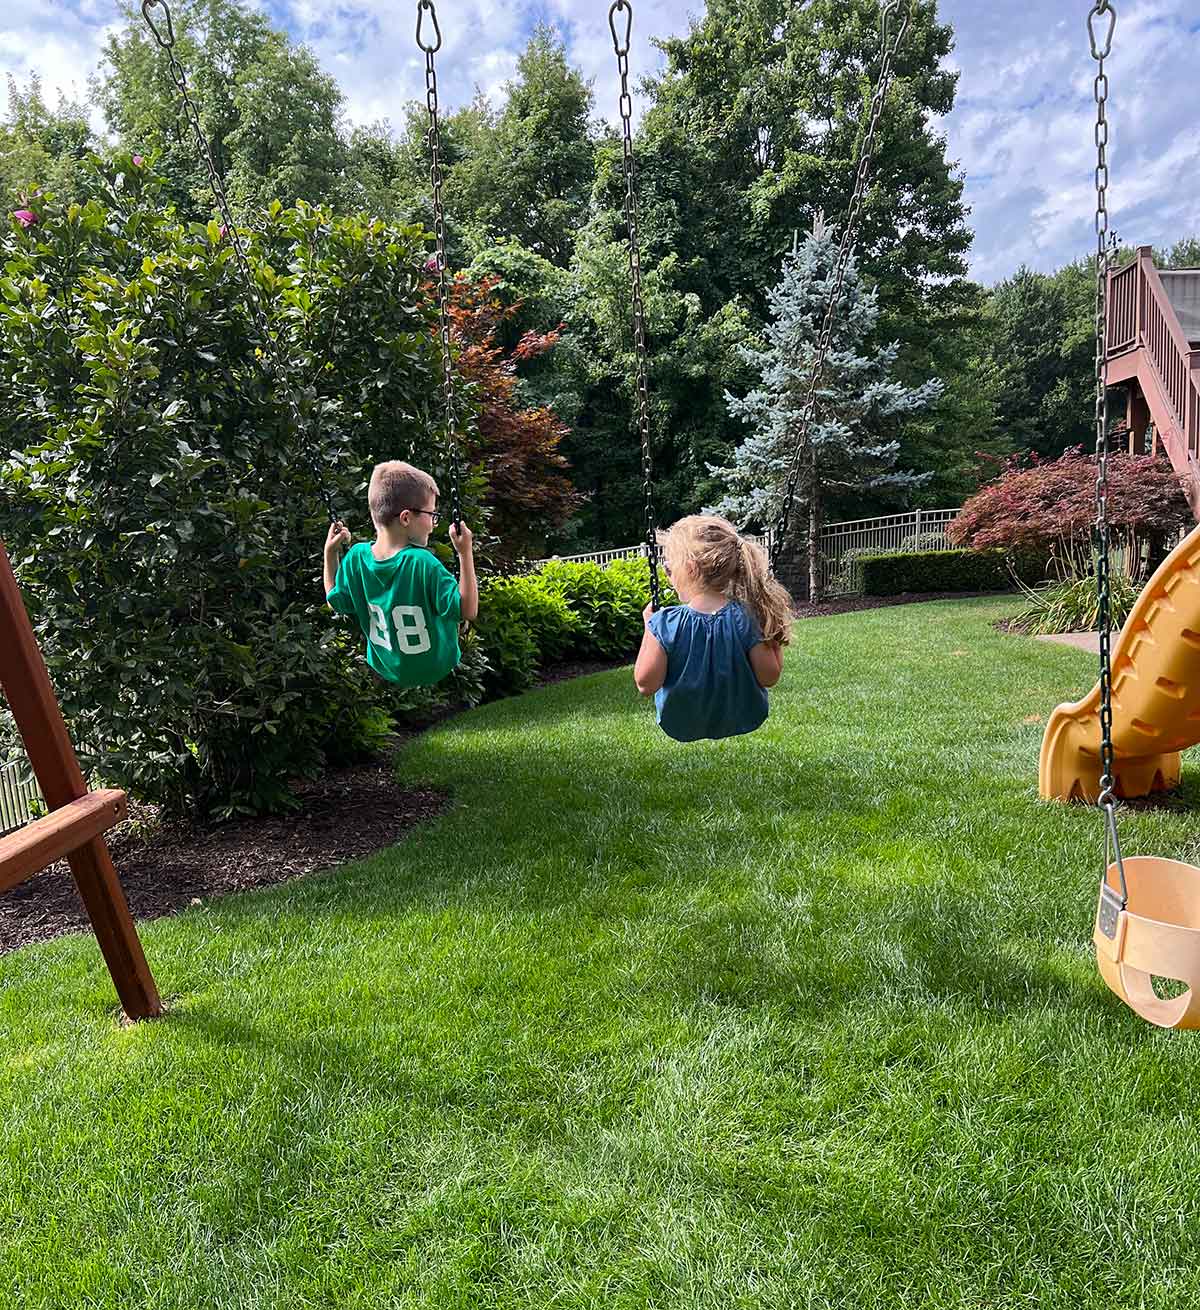 Boy and girl swinging on swings side by side with trees in the background.